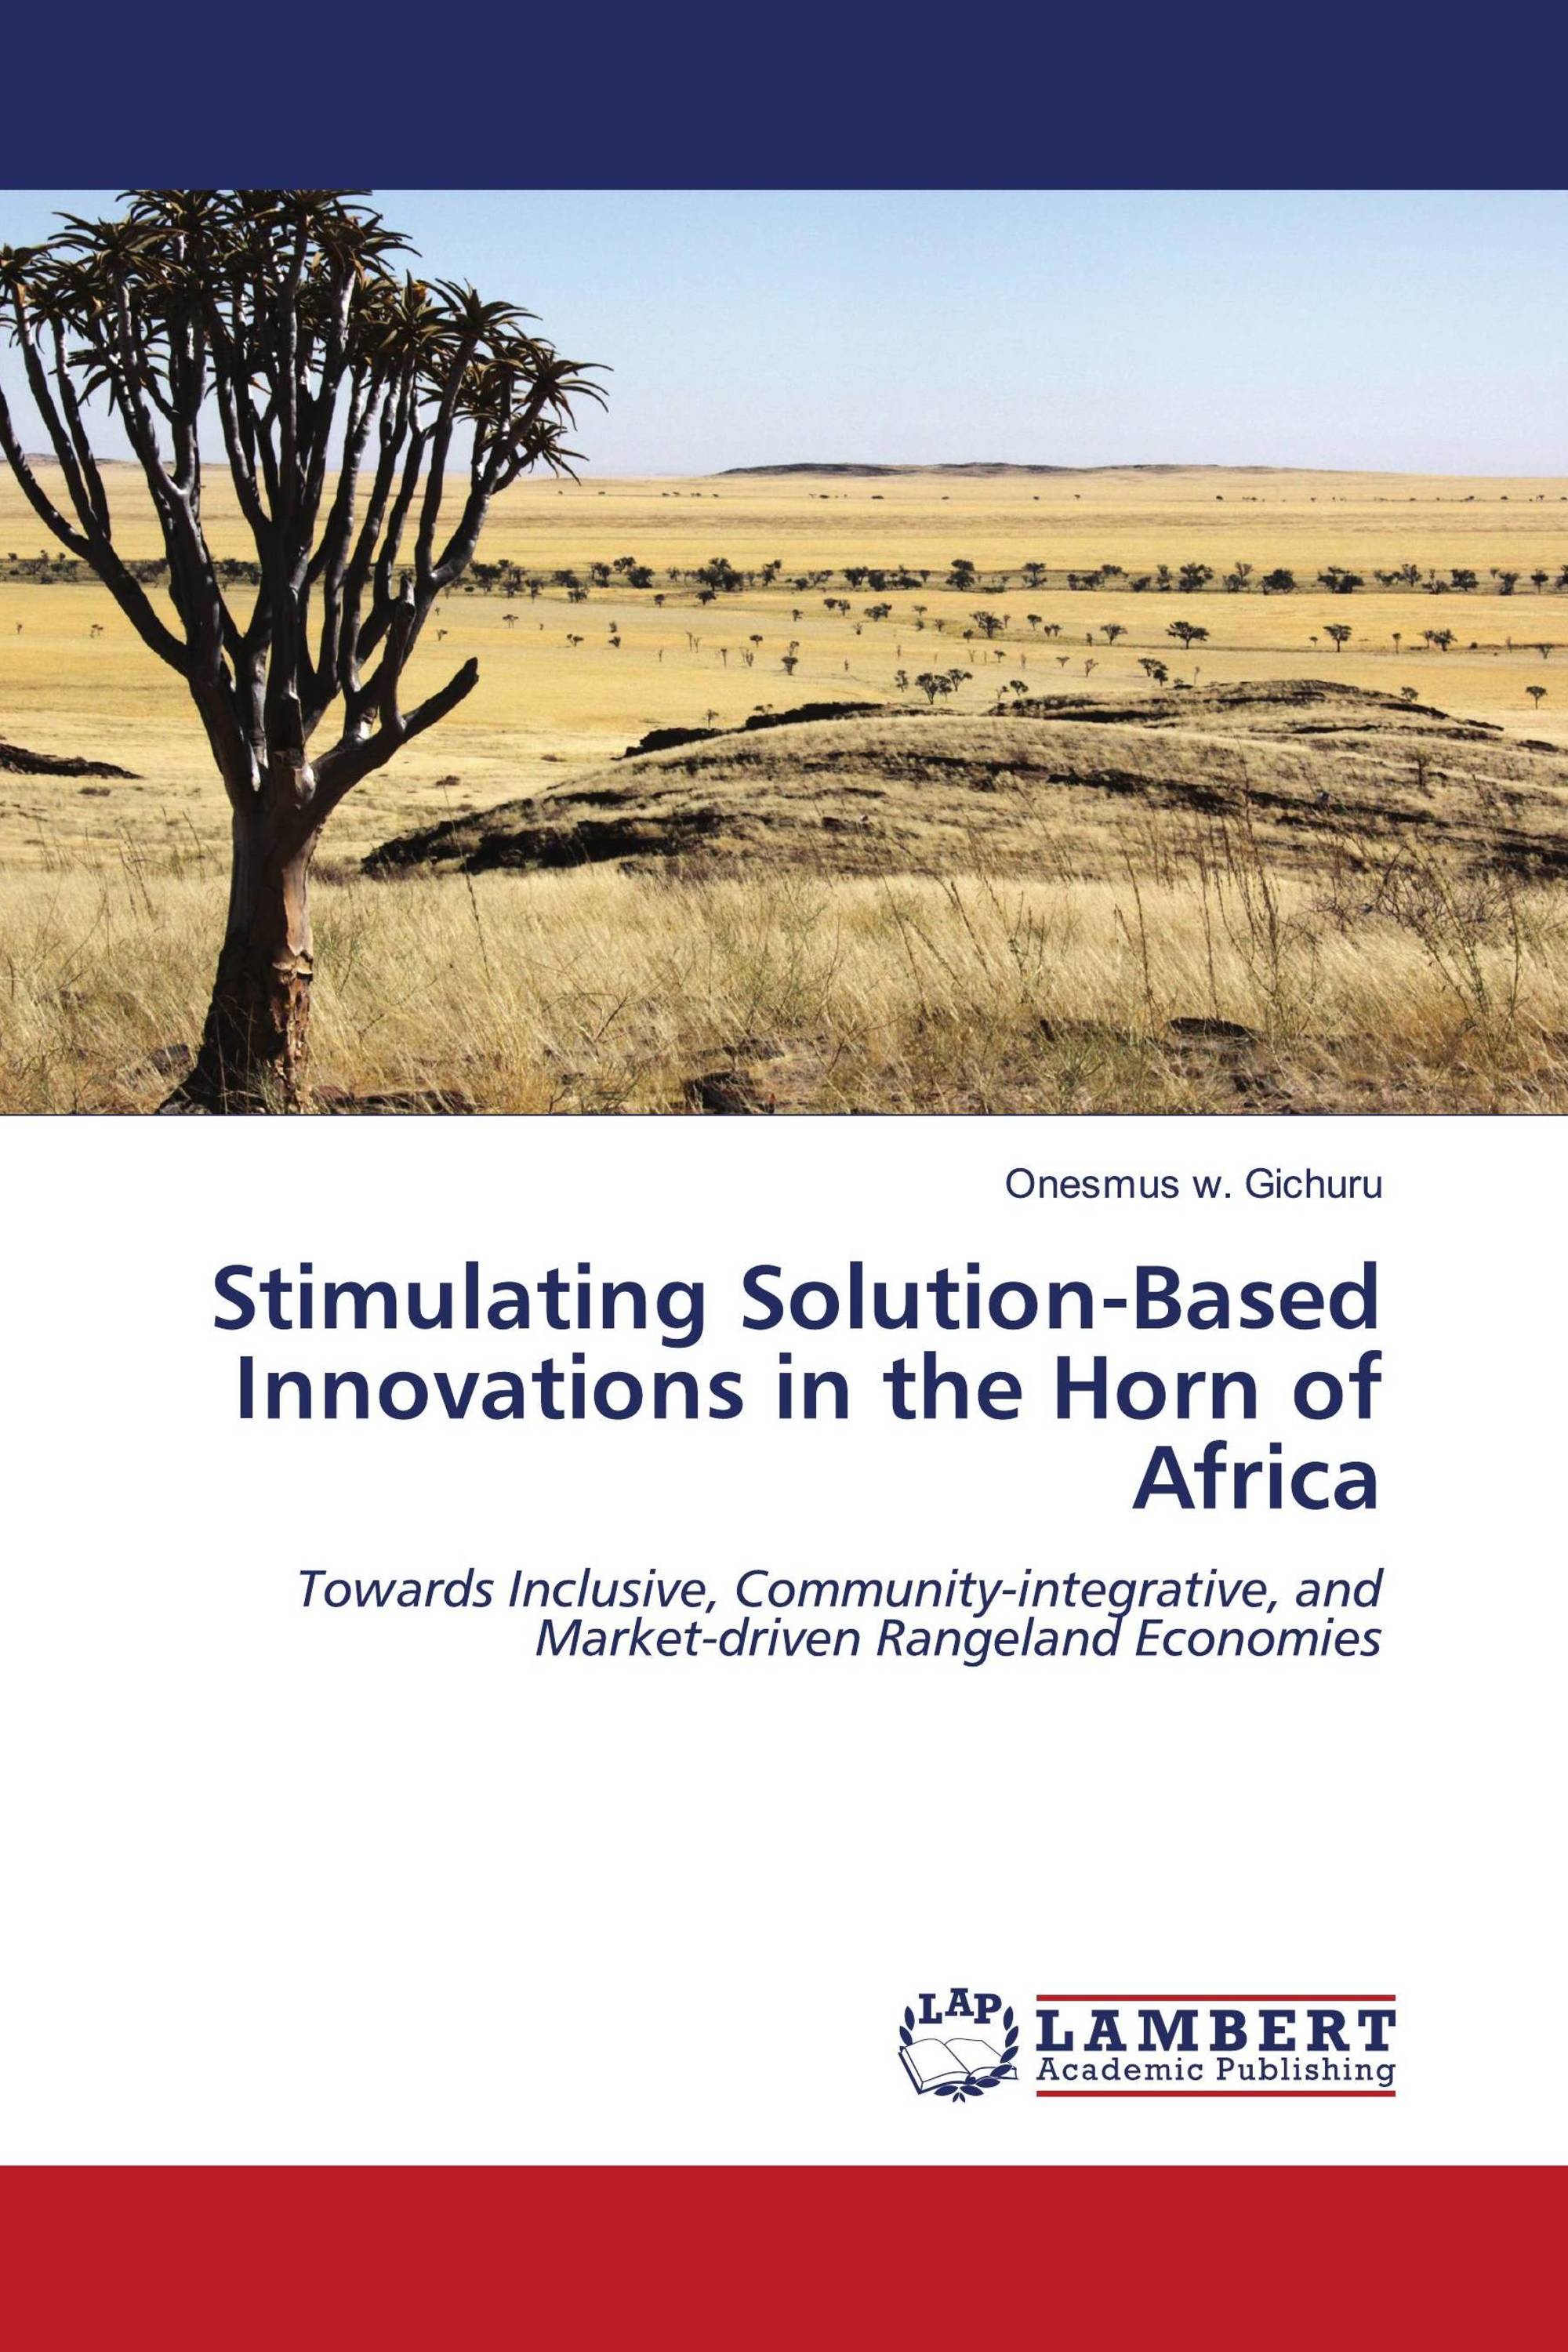 Stimulating Solution-Based Innovations in the Horn of Africa